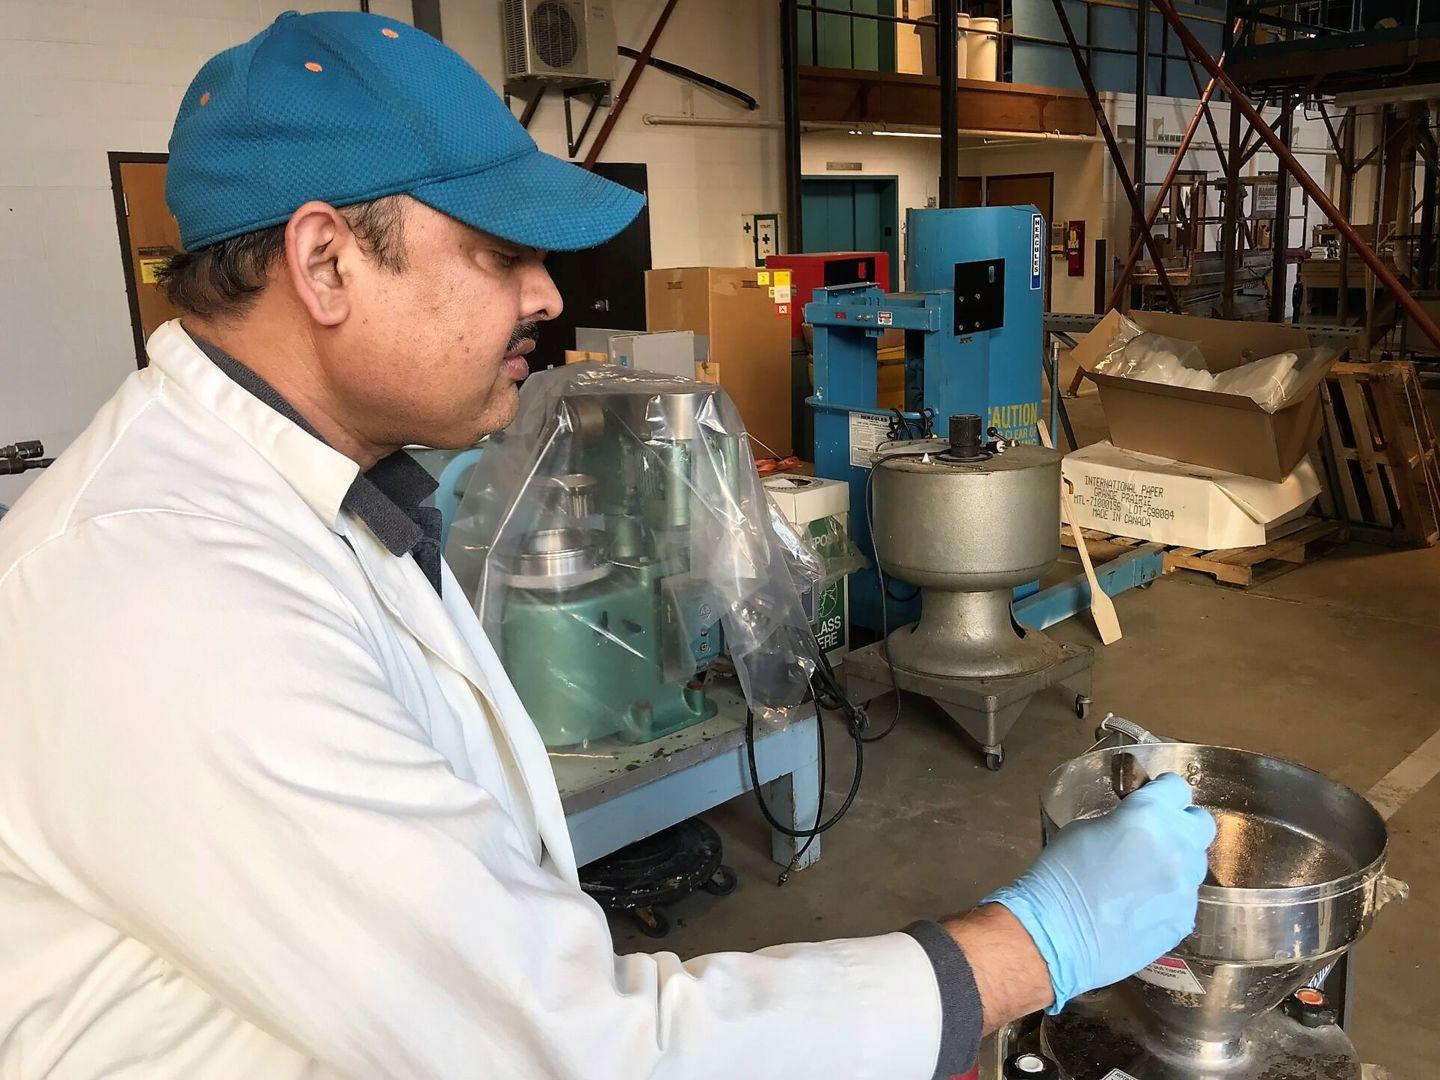 Dr. Hari Singh works on producing ligonocellulosic nanomaterials at the U.S. Forest Products Laboratory in Madison, Wisconsin.